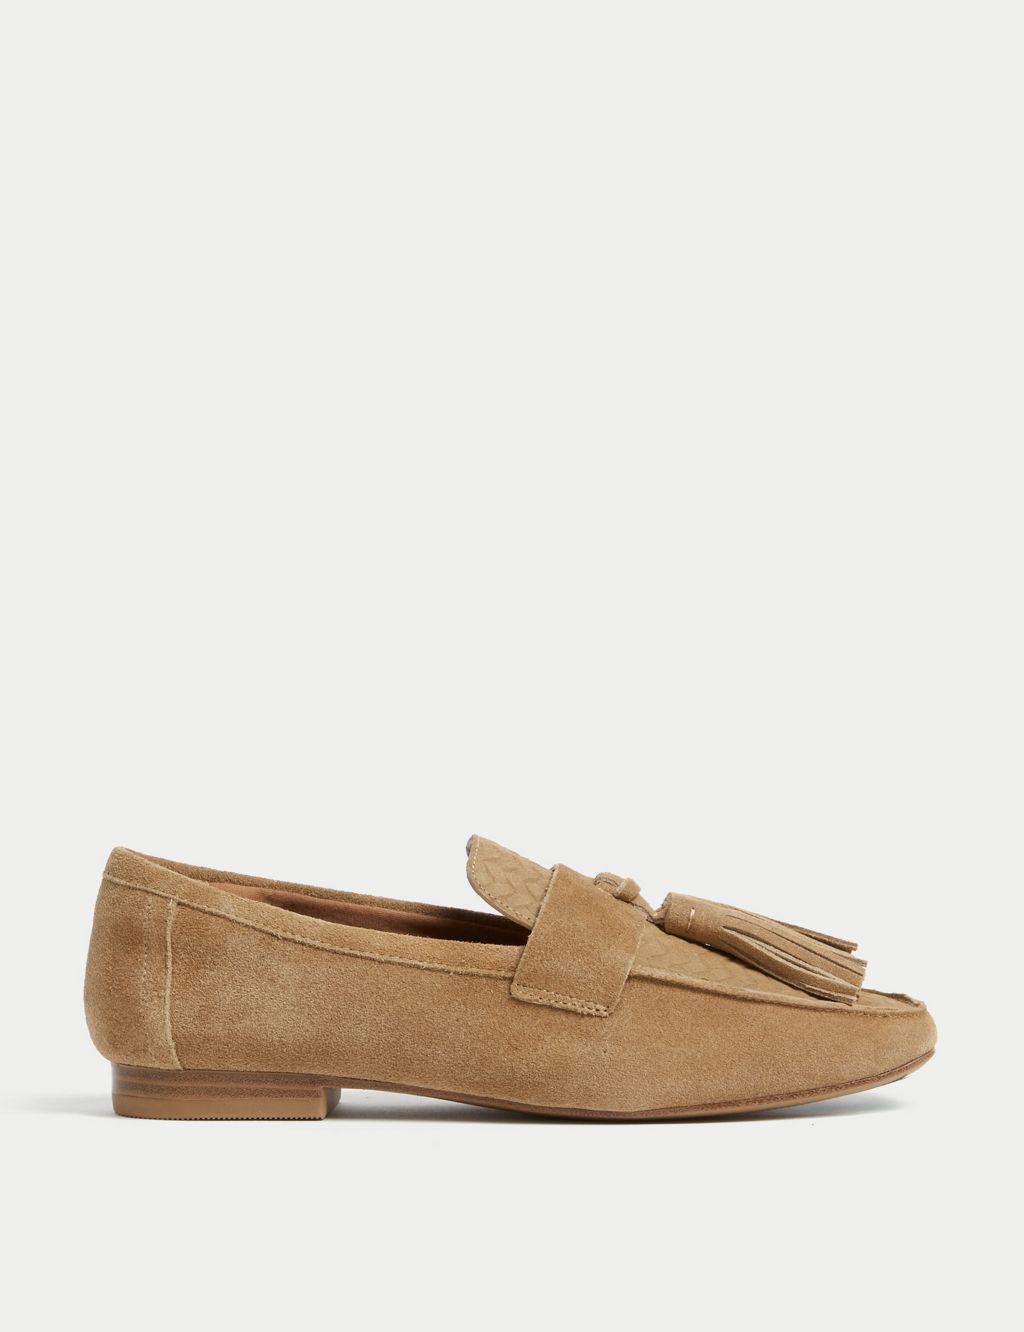 Suede Tassel Flat Loafers image 1